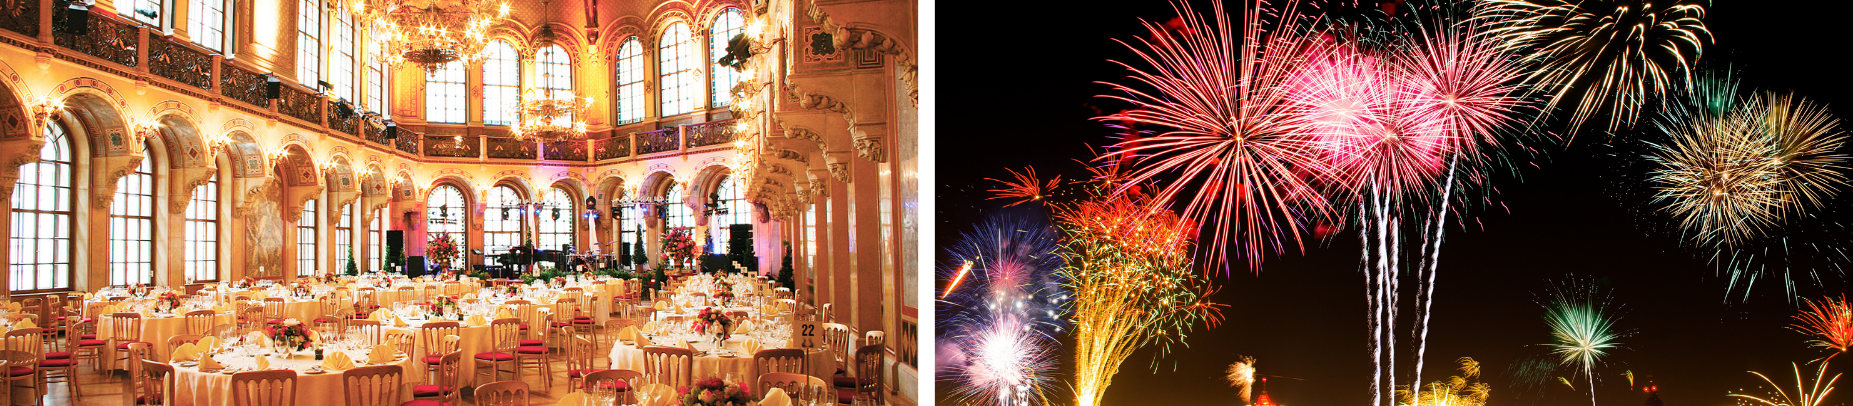 New Year's Eve & New Year's Concerts